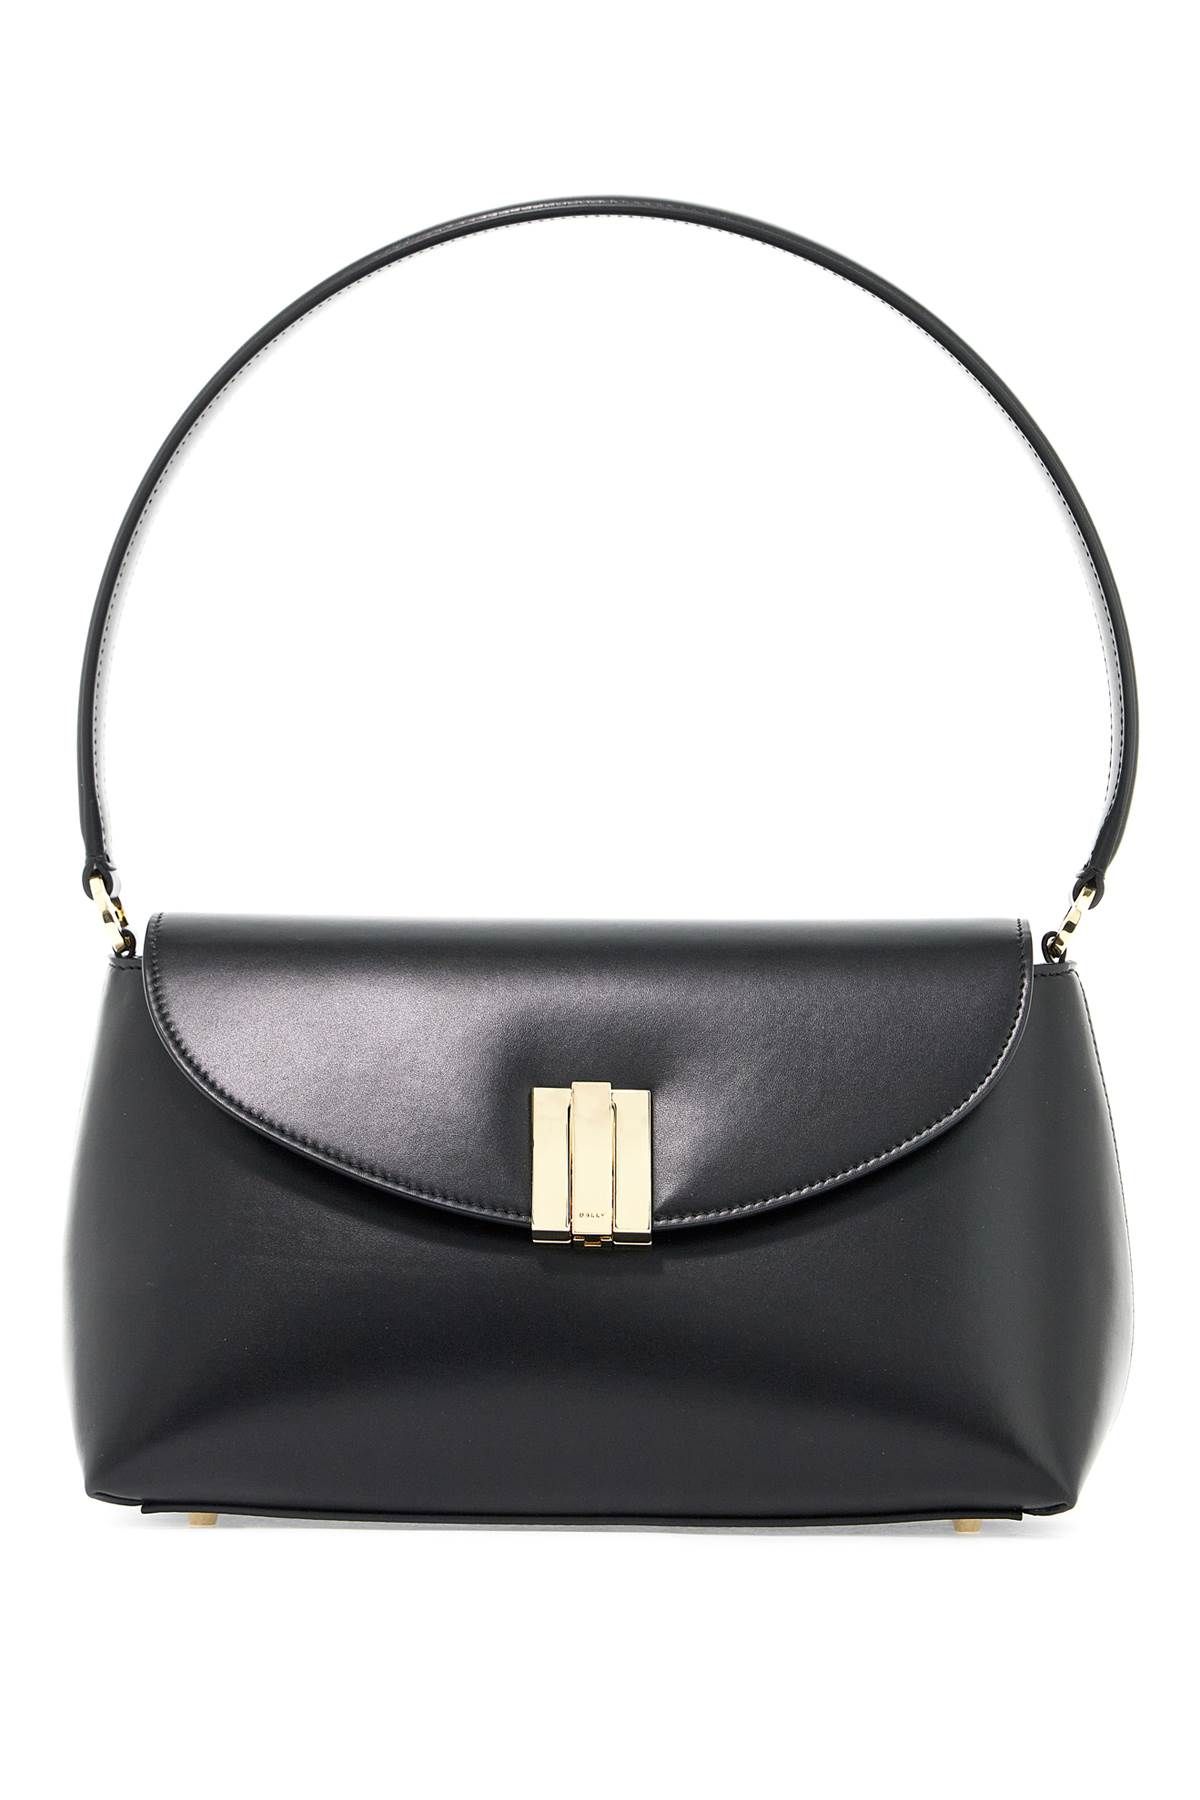 BALLY BALLY ollam leather shoulder bag in